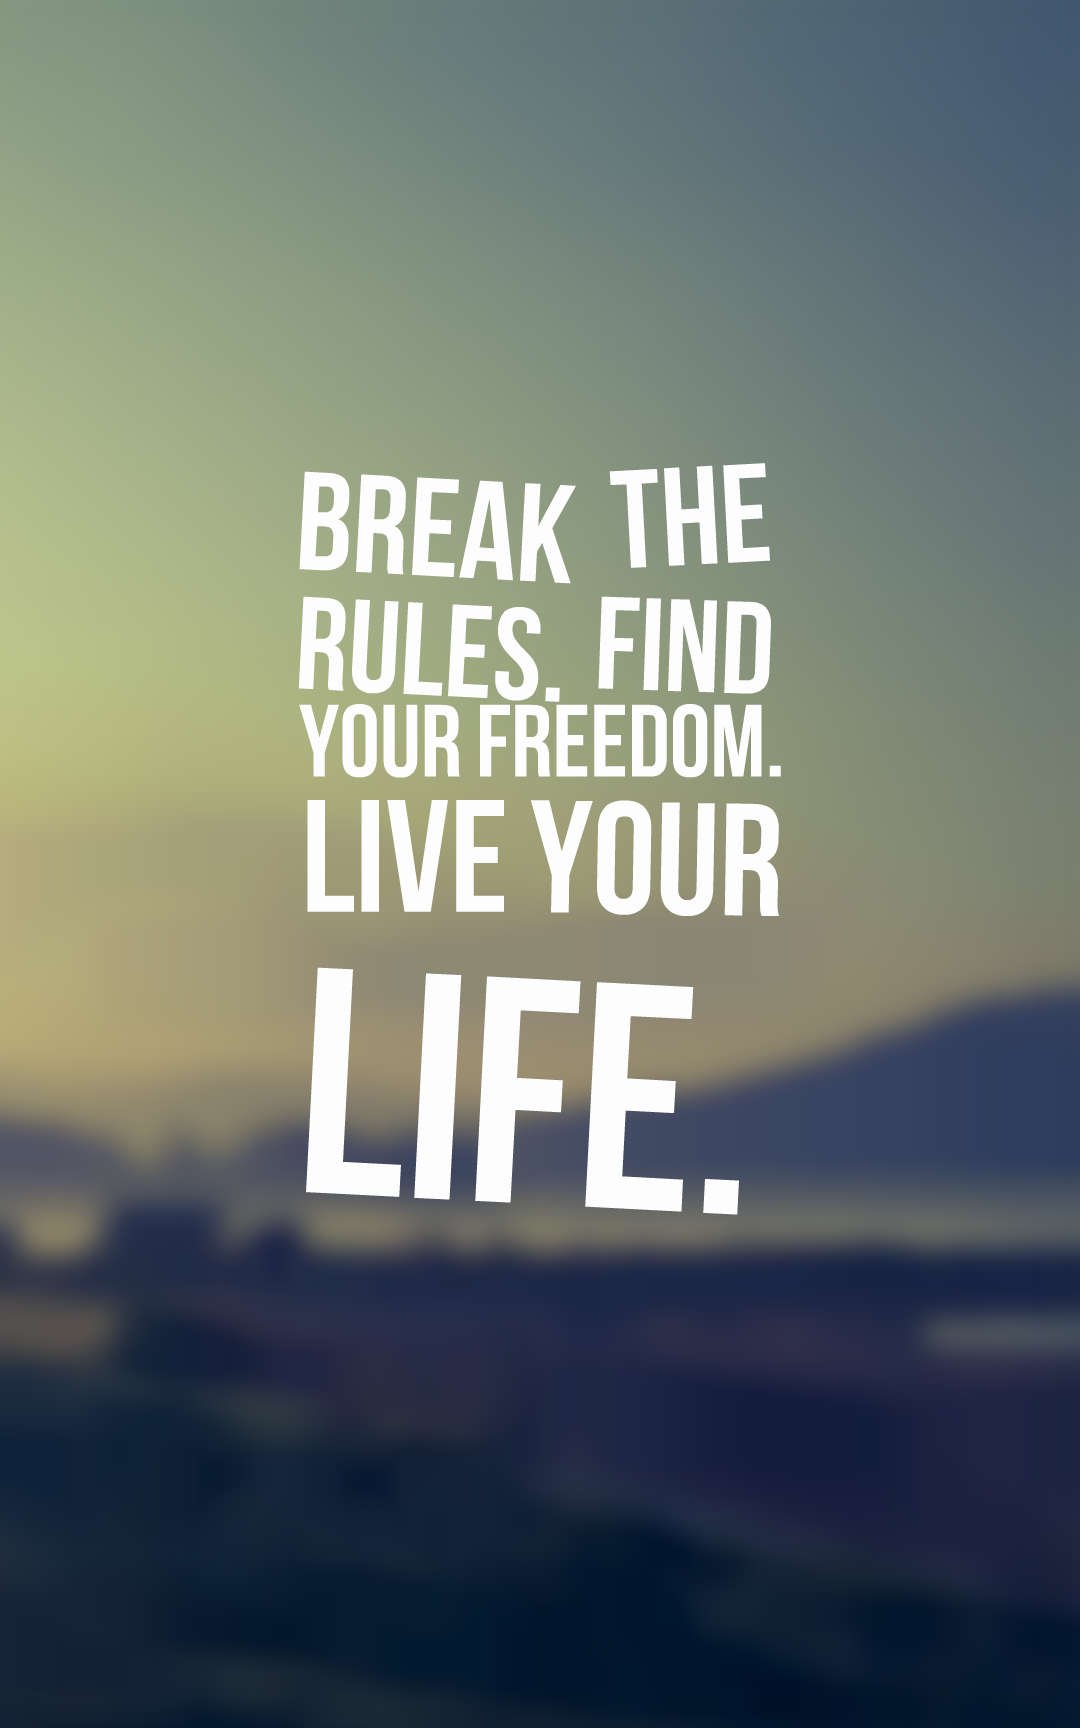 Life your life quotes